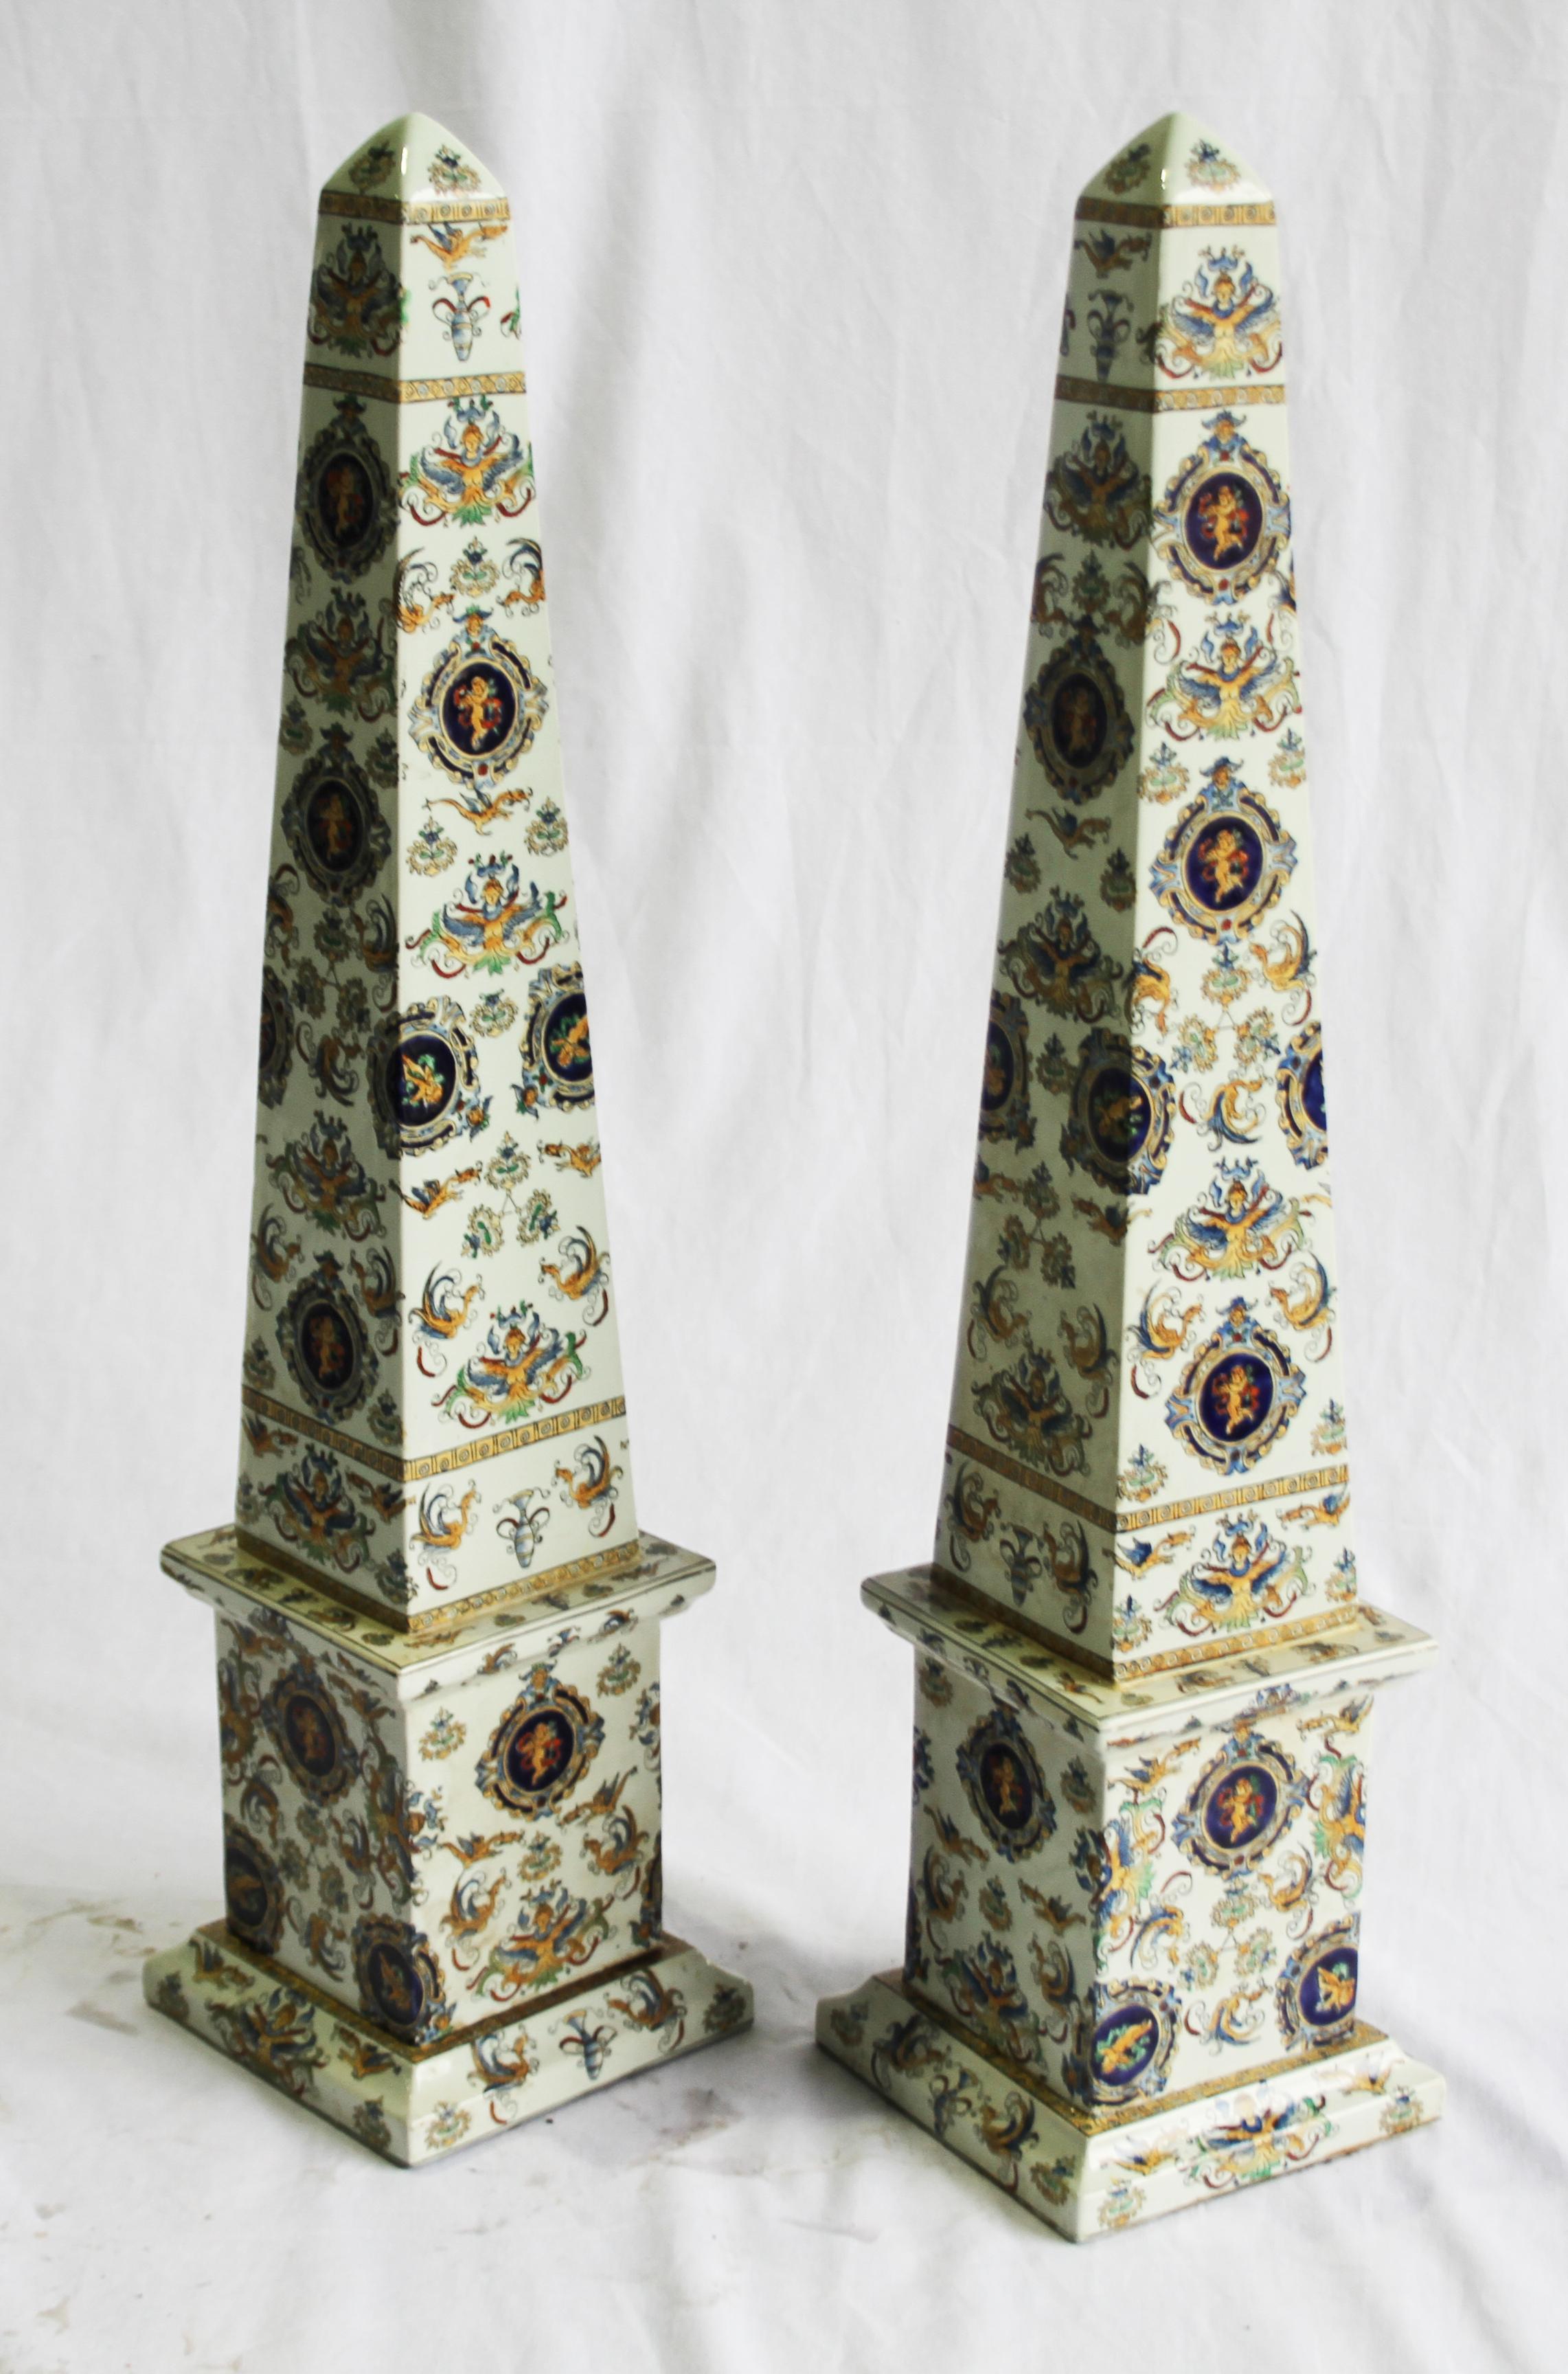 20th Century Pair of Italian Obelisks, Hand-painted porcelain In Good Condition For Sale In London, GB